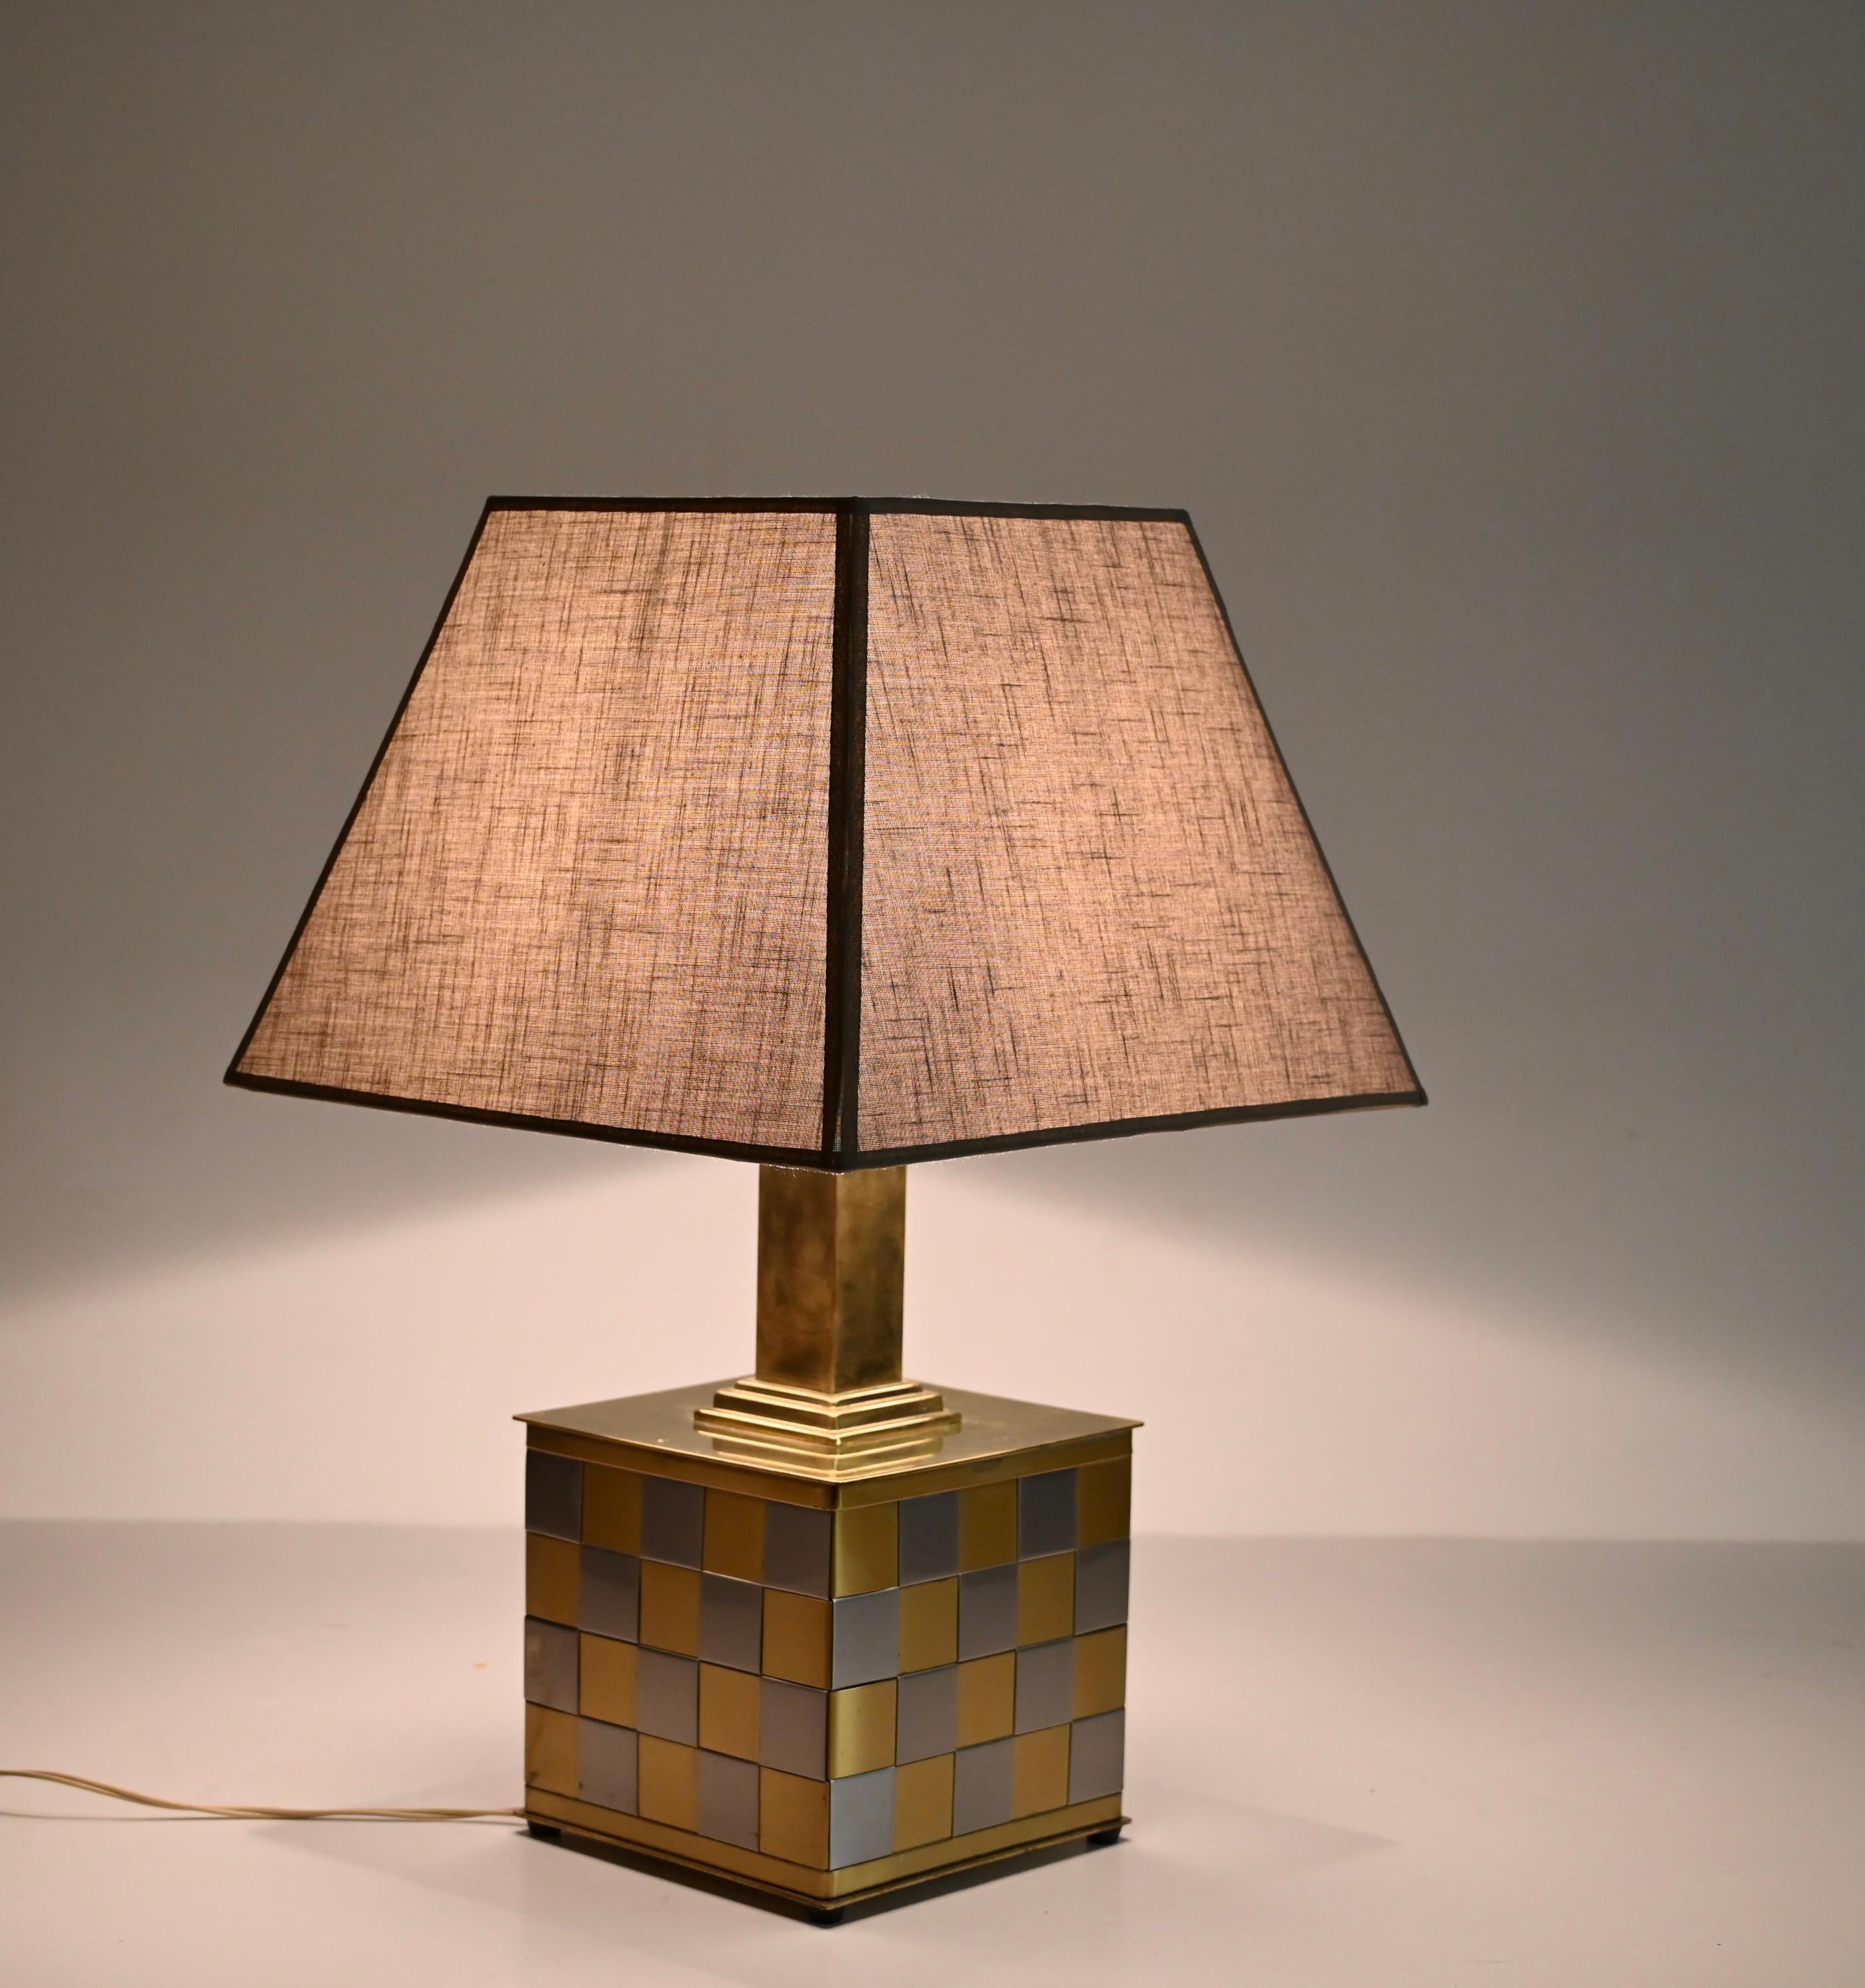 Midcentury Brass and Chrome Table Lamp, Willy Rizzo, Italy 1970s For Sale 1